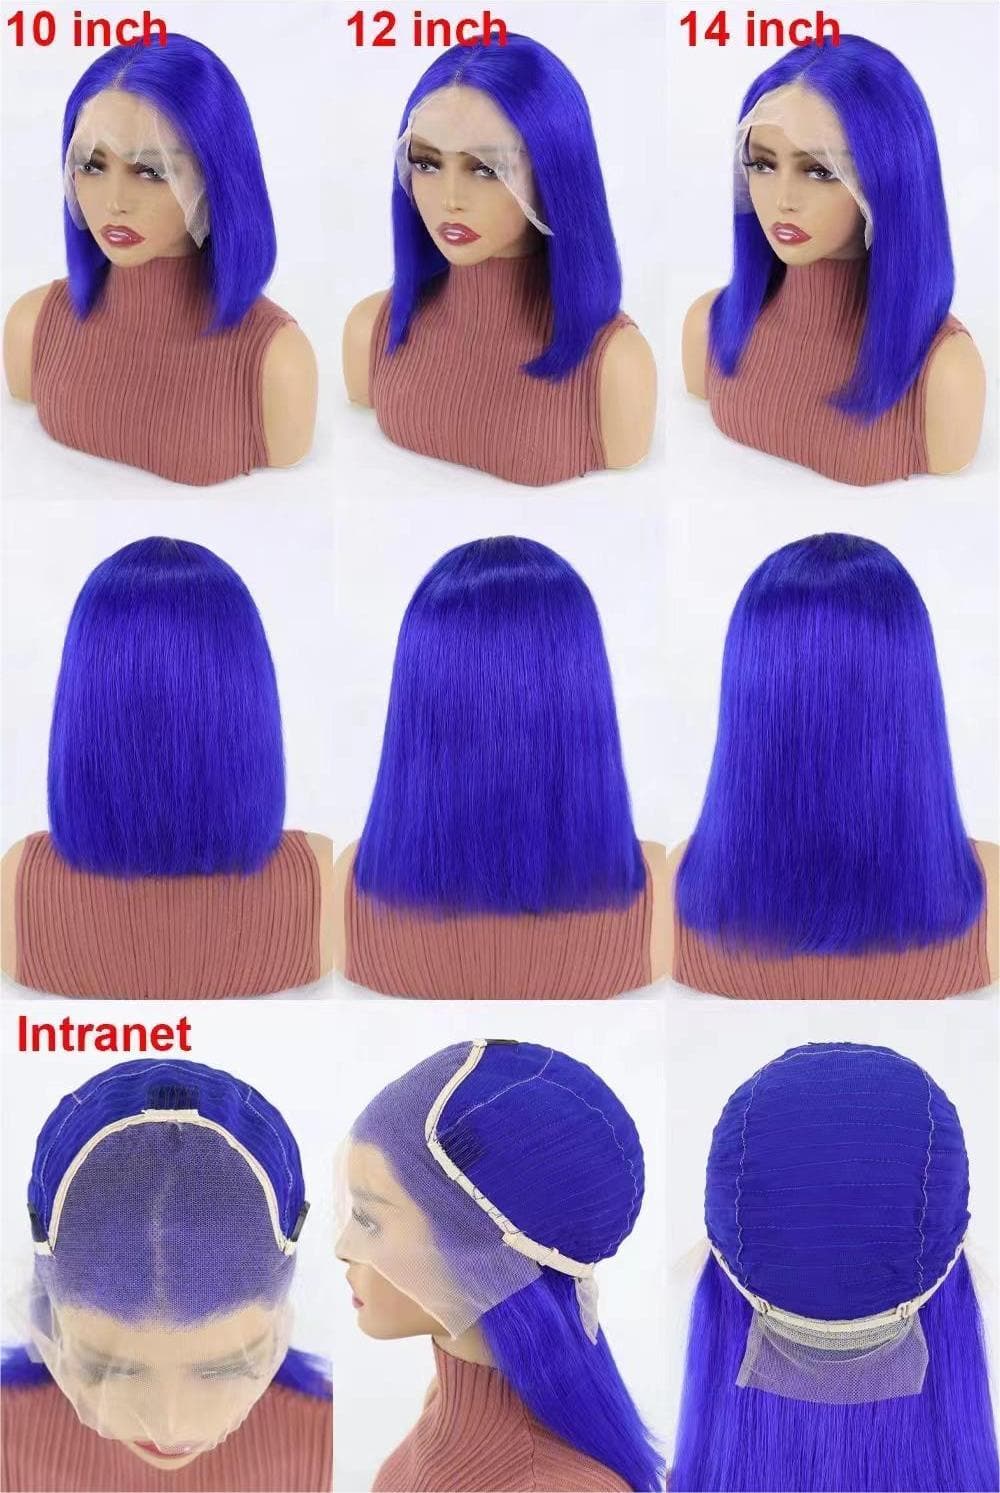 Short Bob Wigs Human Hair 13x4 Lace Front Straight Middle Parted Hairstyles Blue E-LITCHI Hair